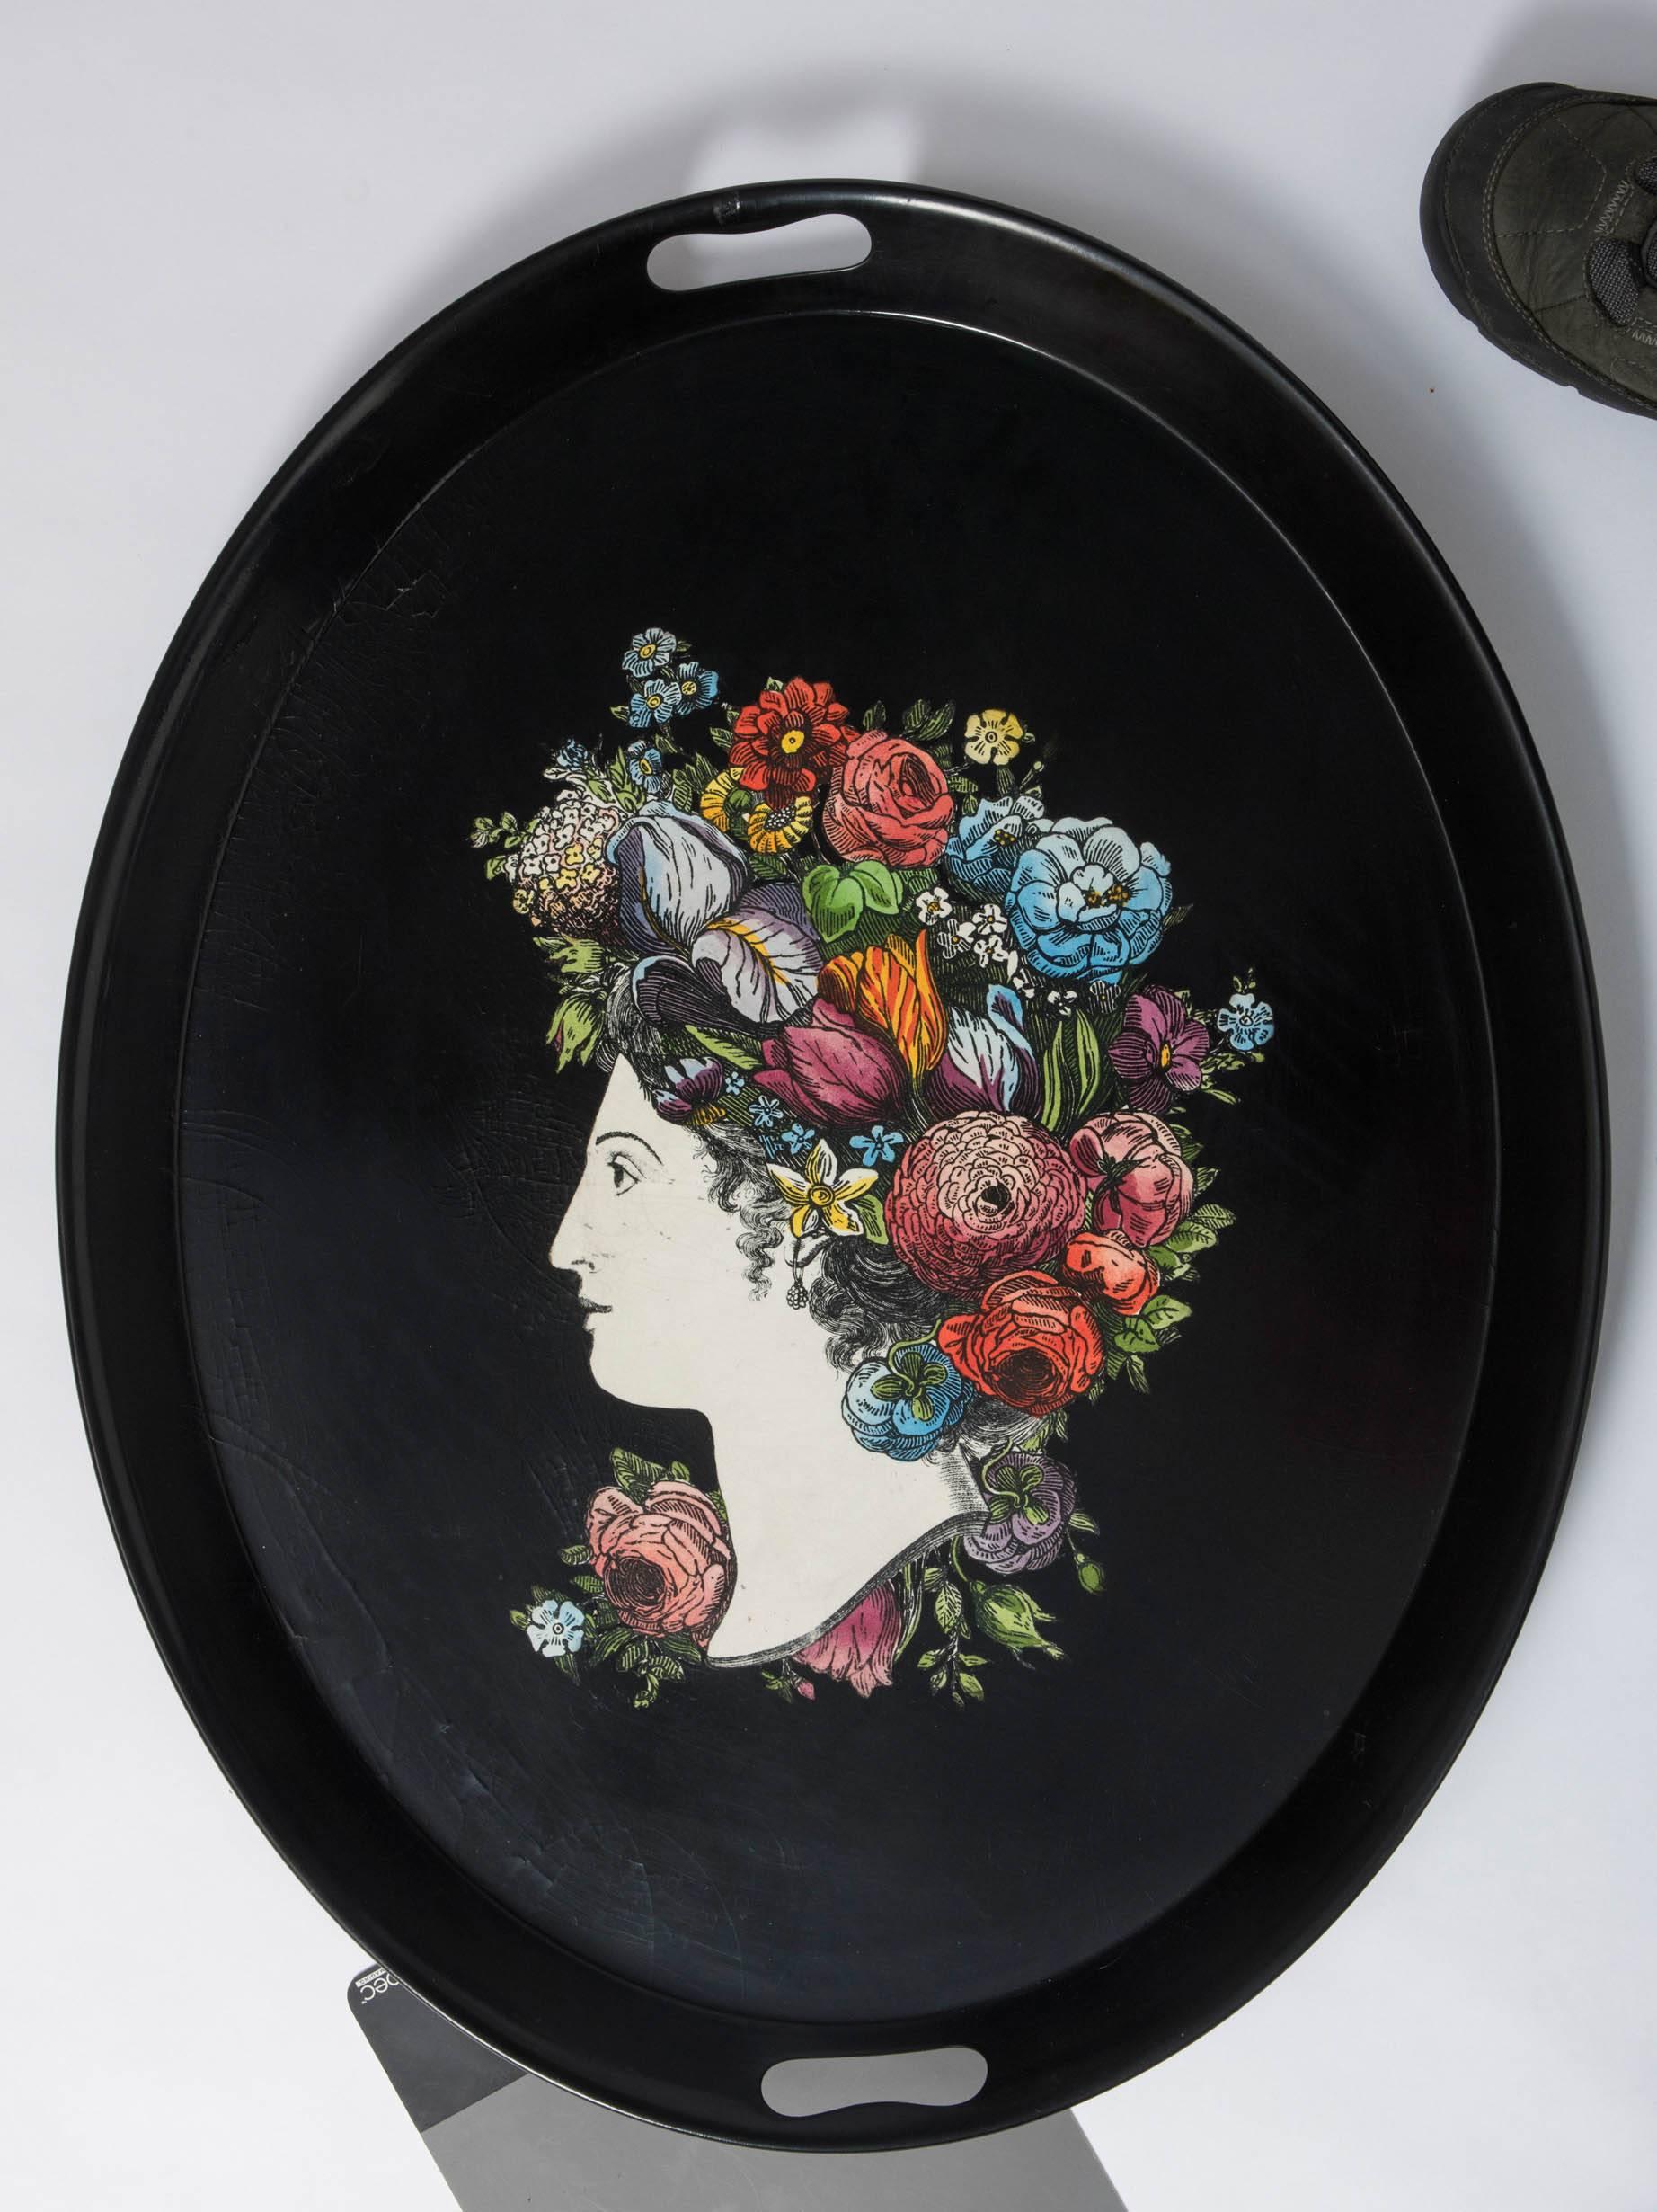 Piero Fornasetti metal serving tray "Flora".
Metal, lithographically printed and hand colored.
Italy, circa 1960.
Measures: 68.5 cm x 55.5 cm.
             